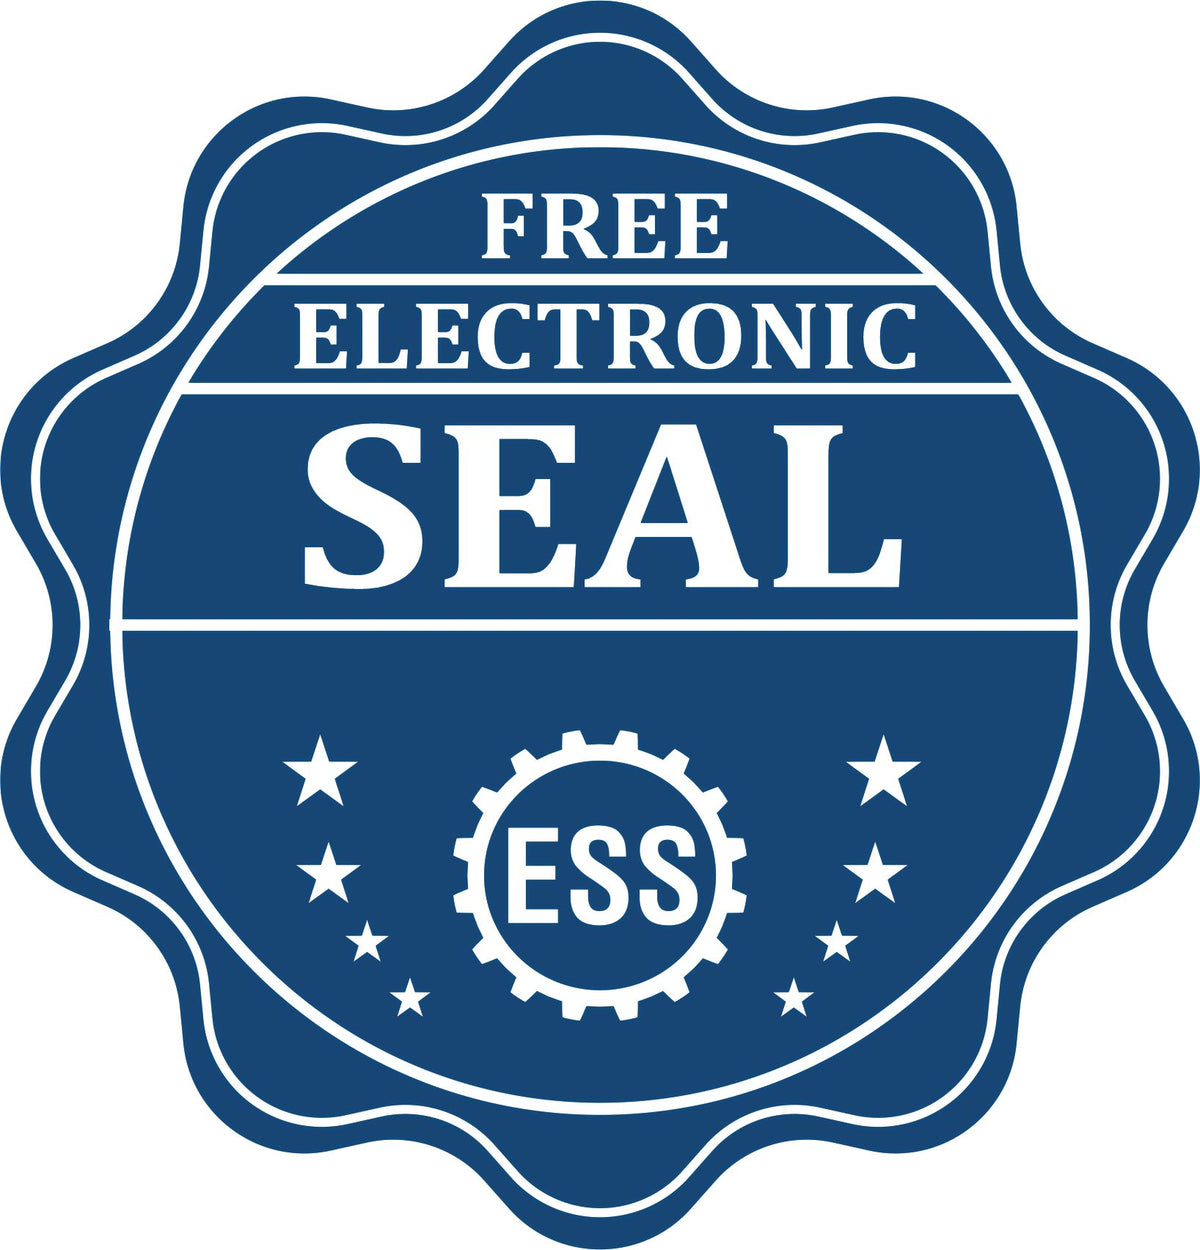 A badge showing a free electronic seal for the State of Kansas Extended Long Reach Engineer Seal with stars and the ESS gear on the emblem.